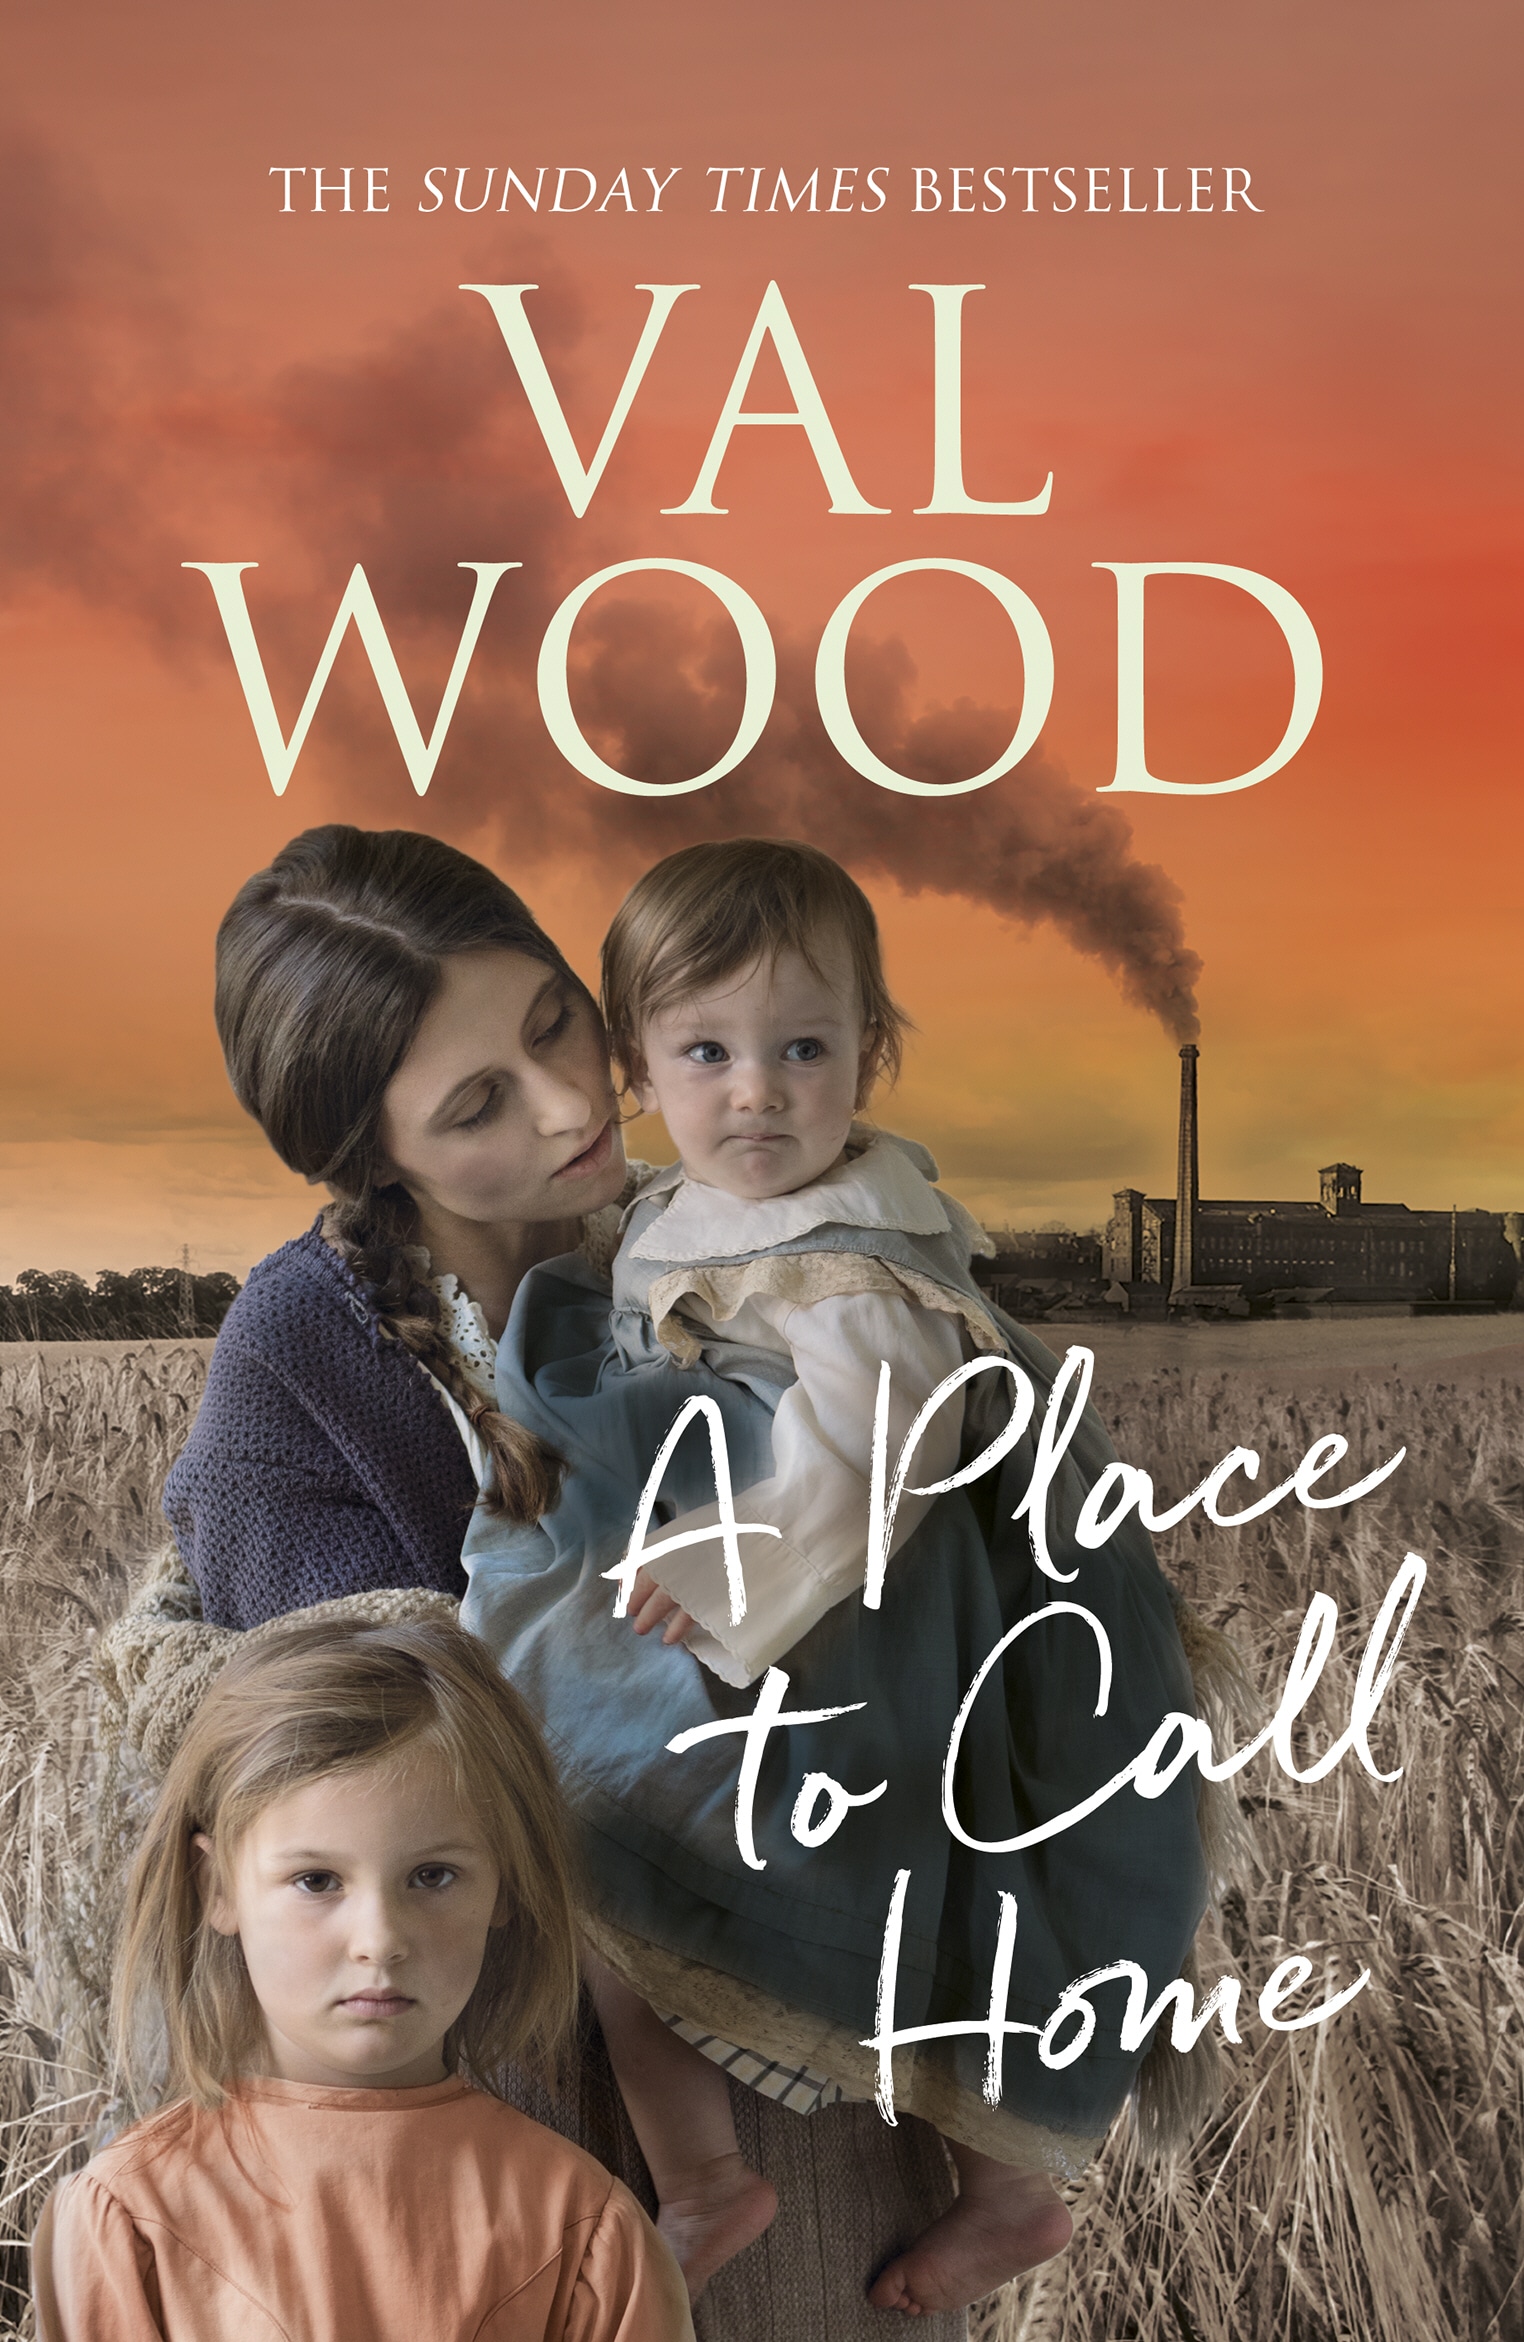 Book “A Place to Call Home” by Val Wood — January 24, 2019